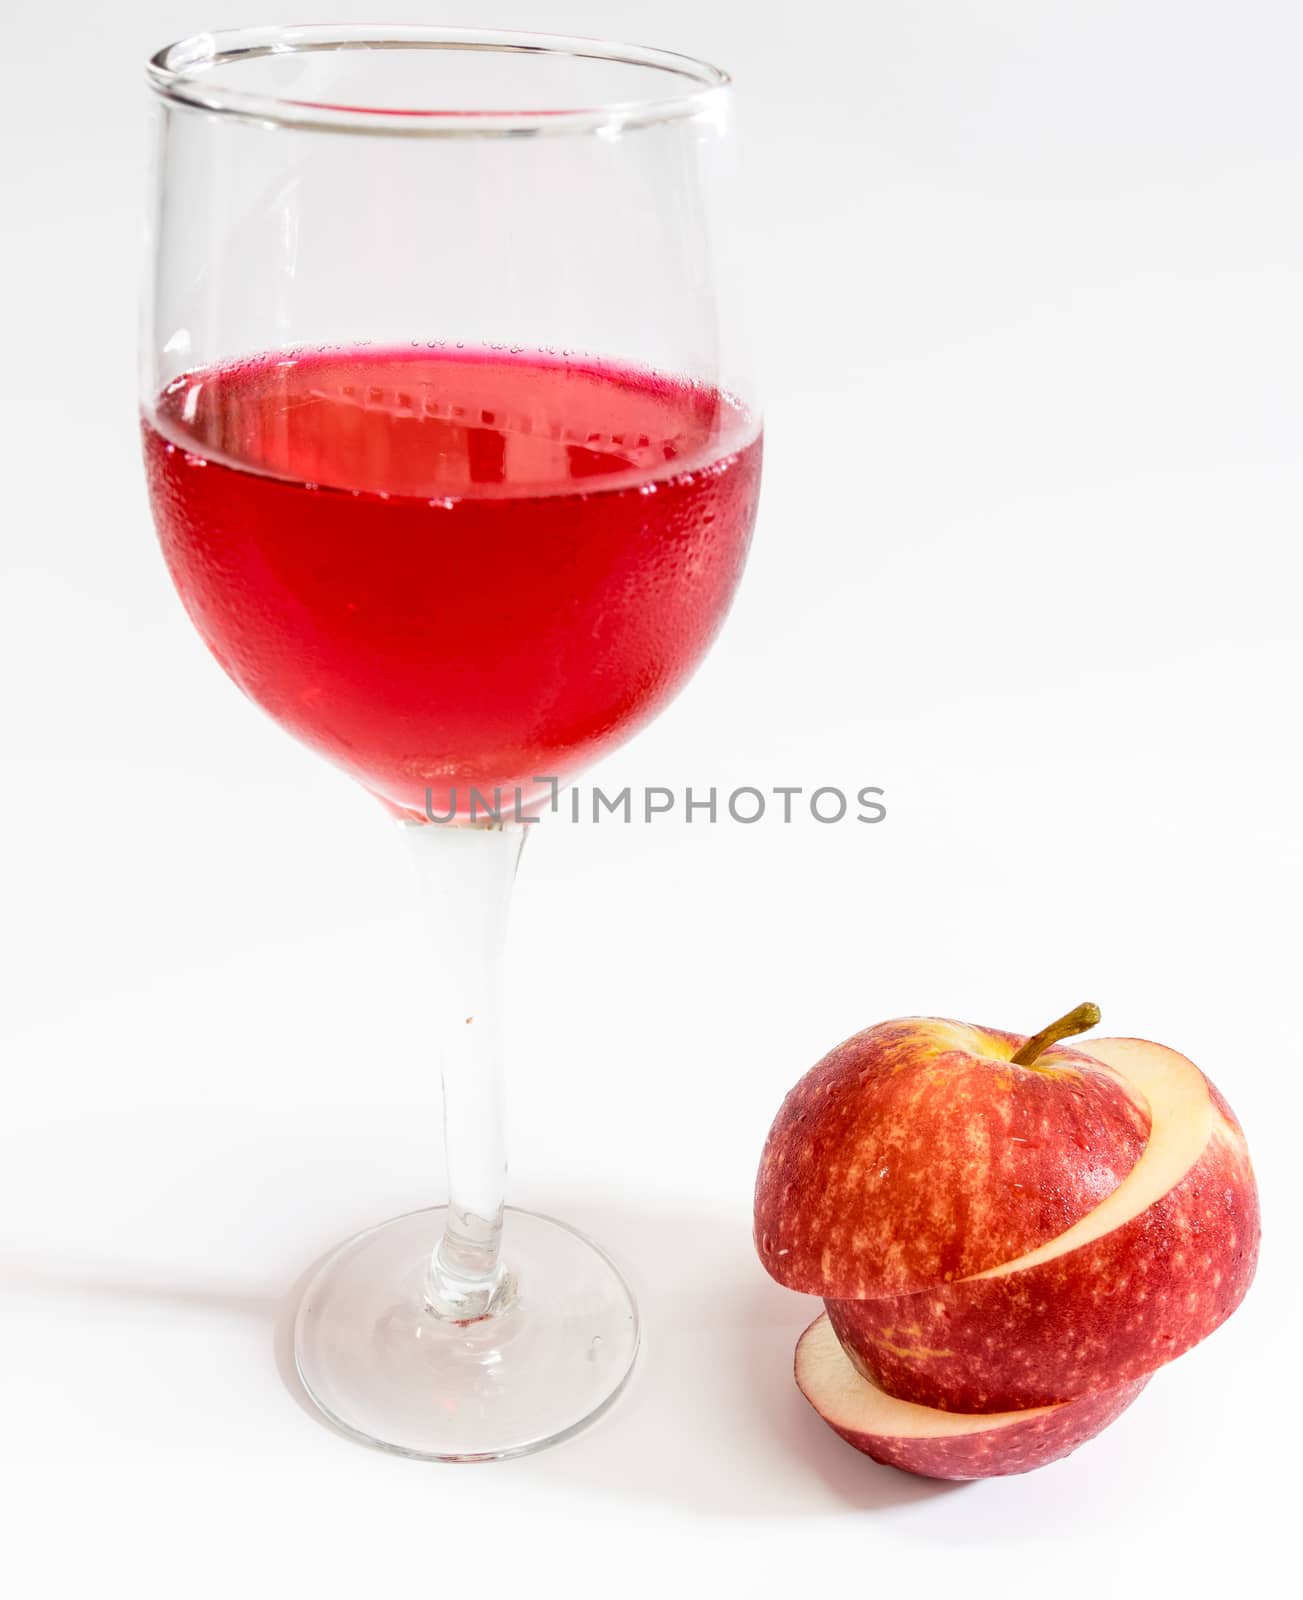 Red apple on white background. by wattanaphob